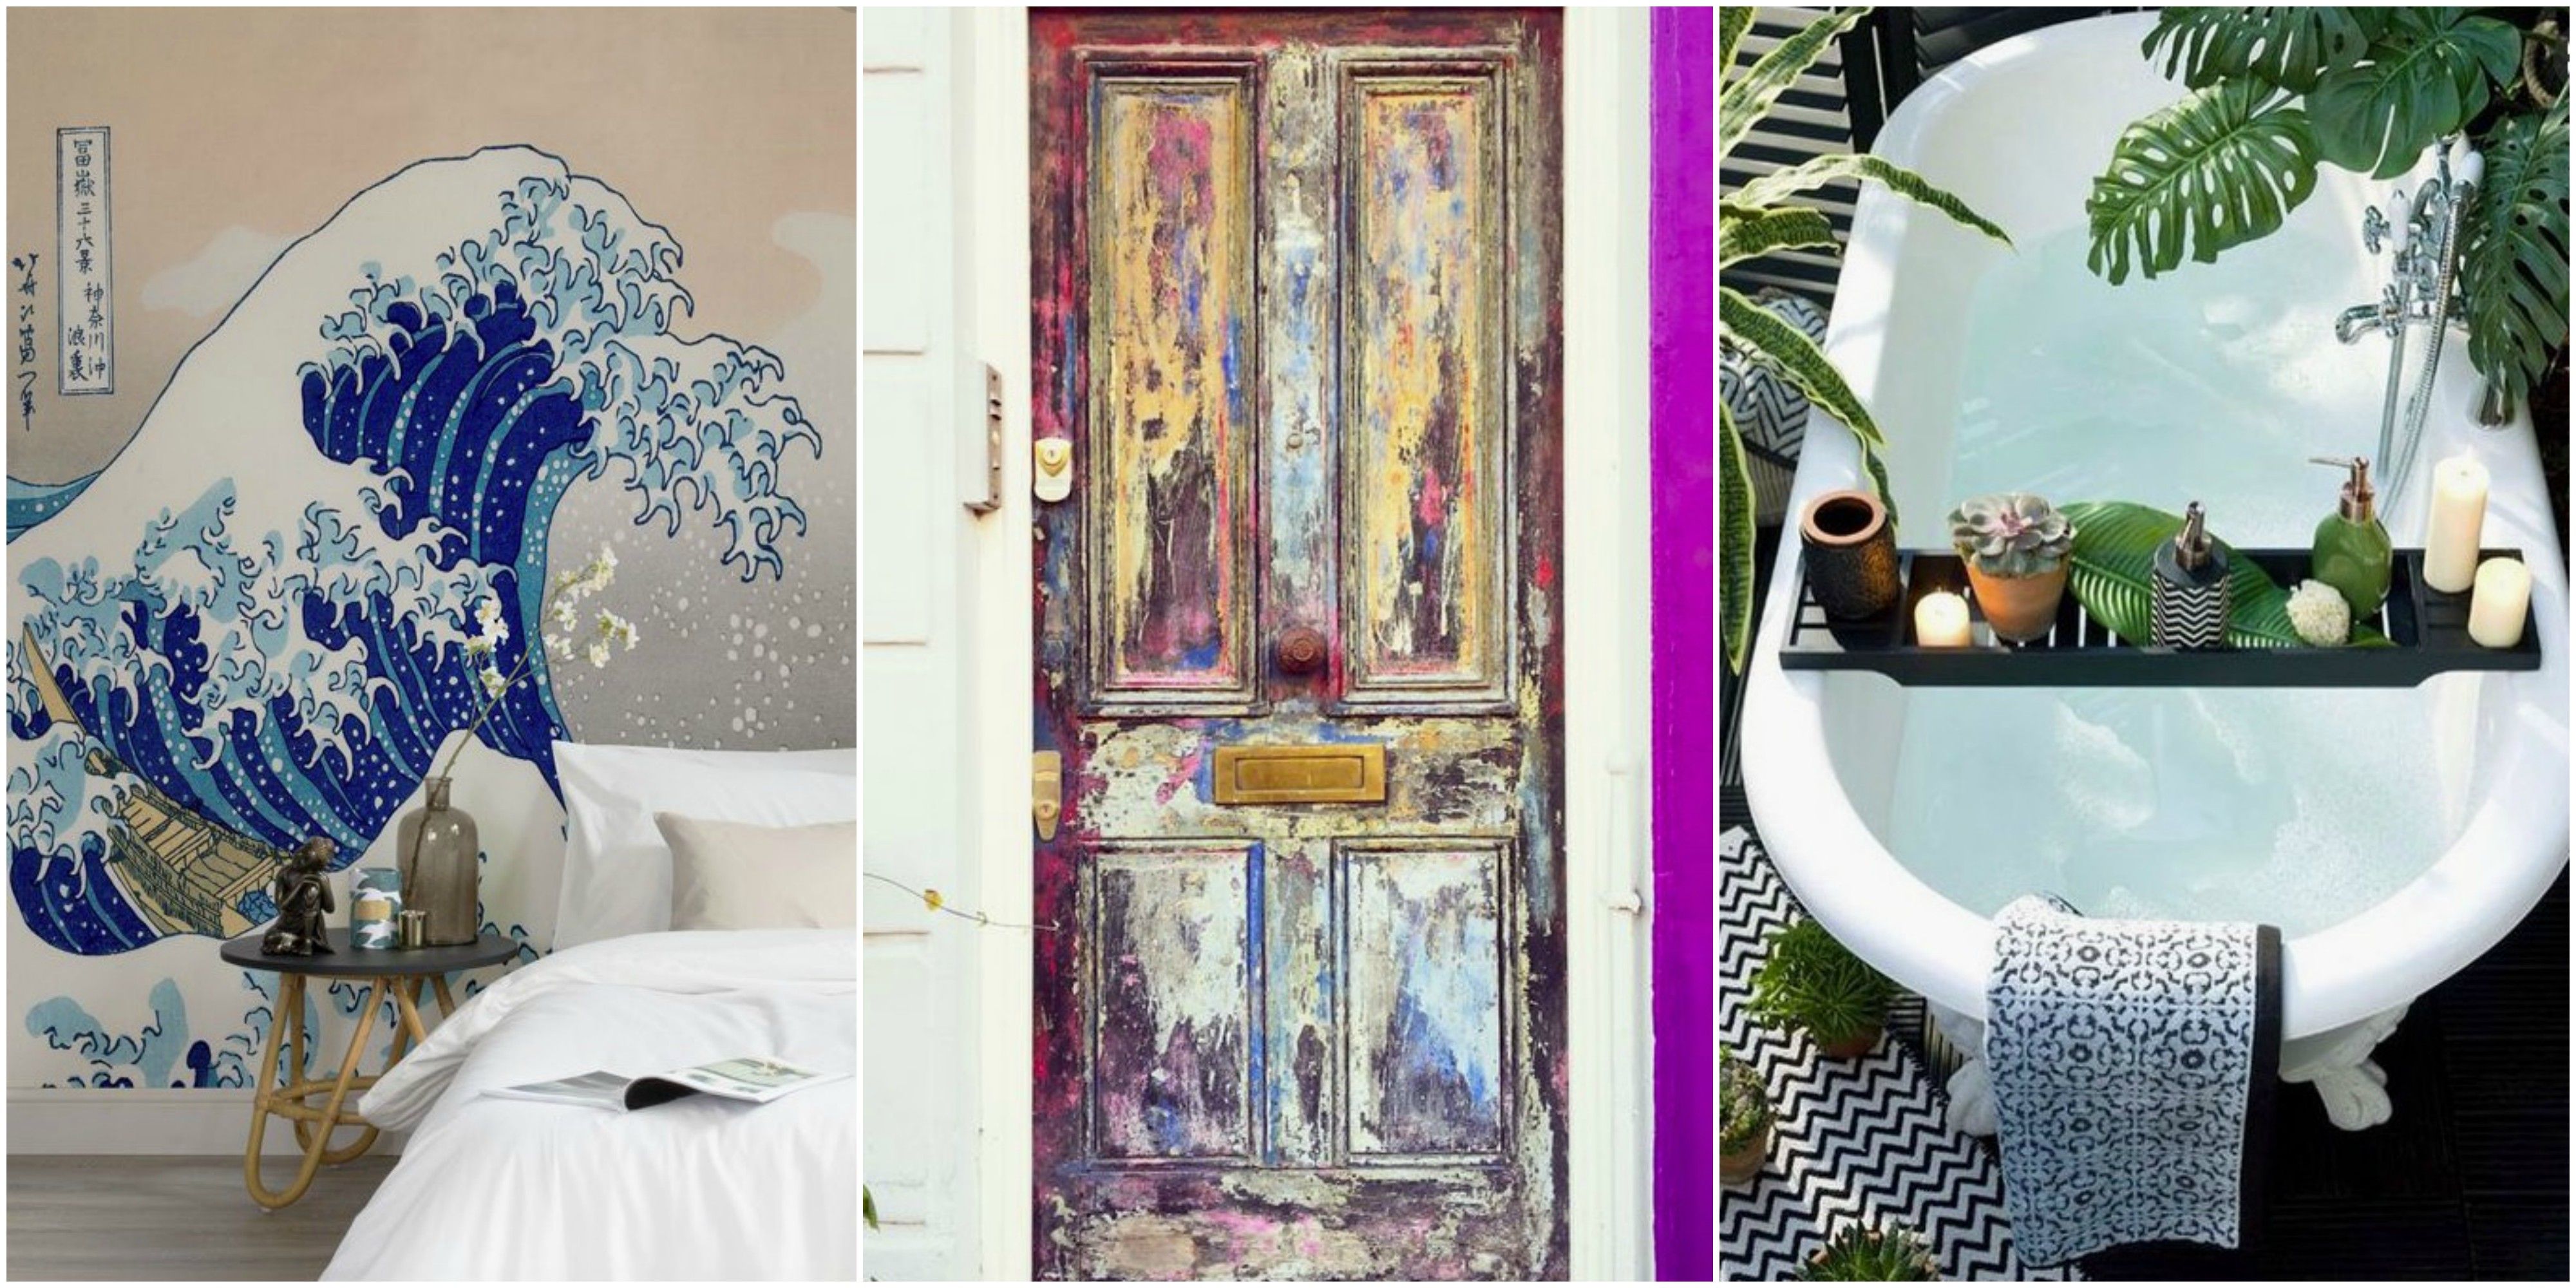 Top 10 Home Trends For 18 According To The Pinterest 100 Report